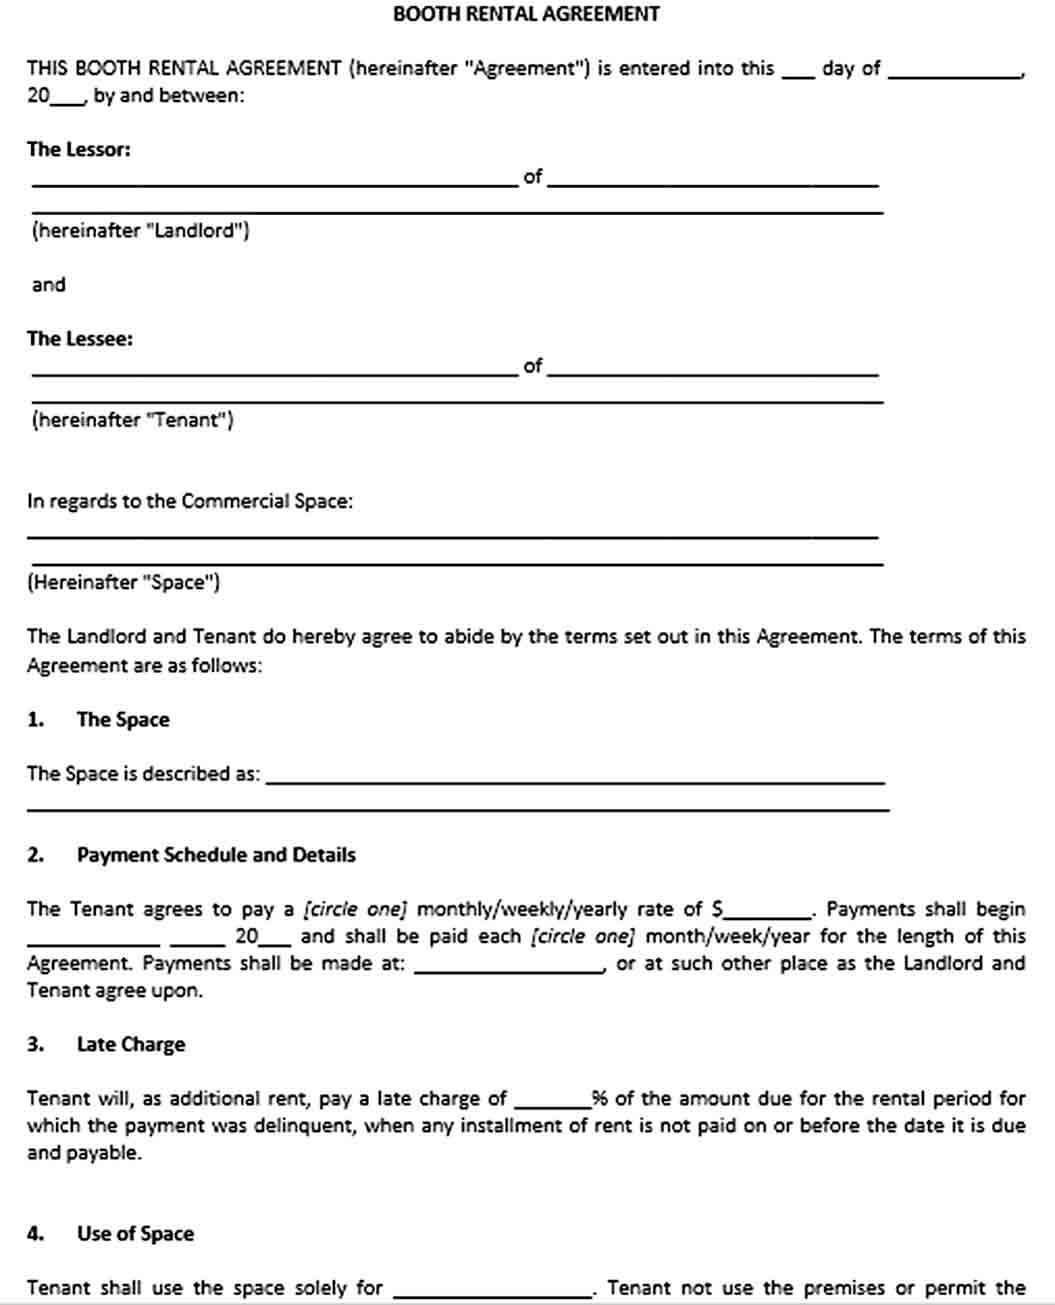 Sample Event Booth Rental Agreement Template